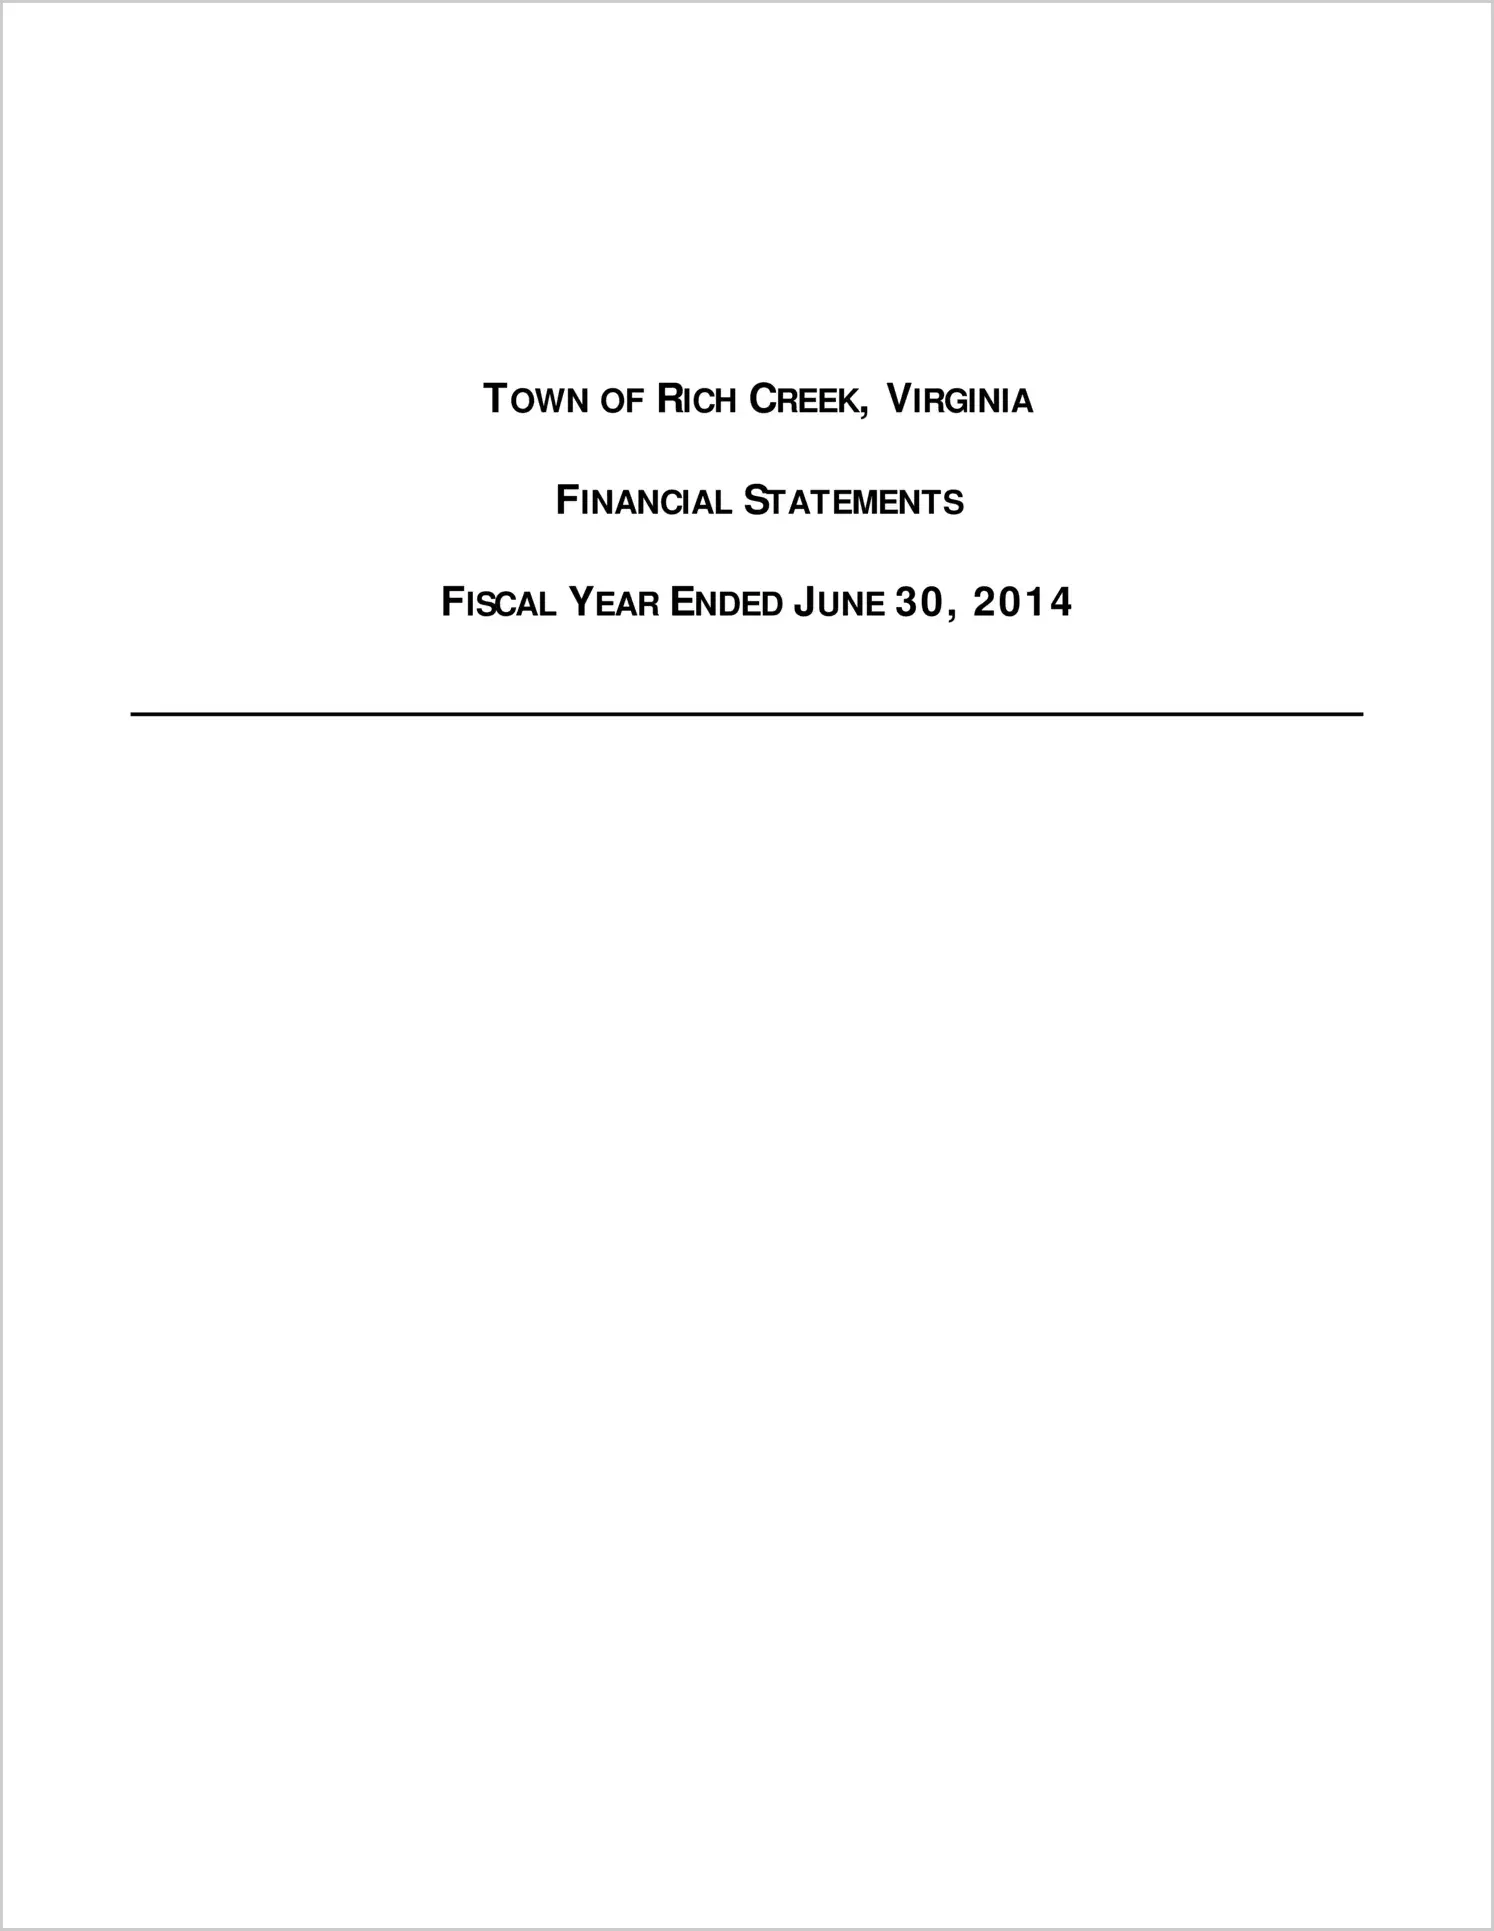 2014 Annual Financial Report for Town of Rich Creek